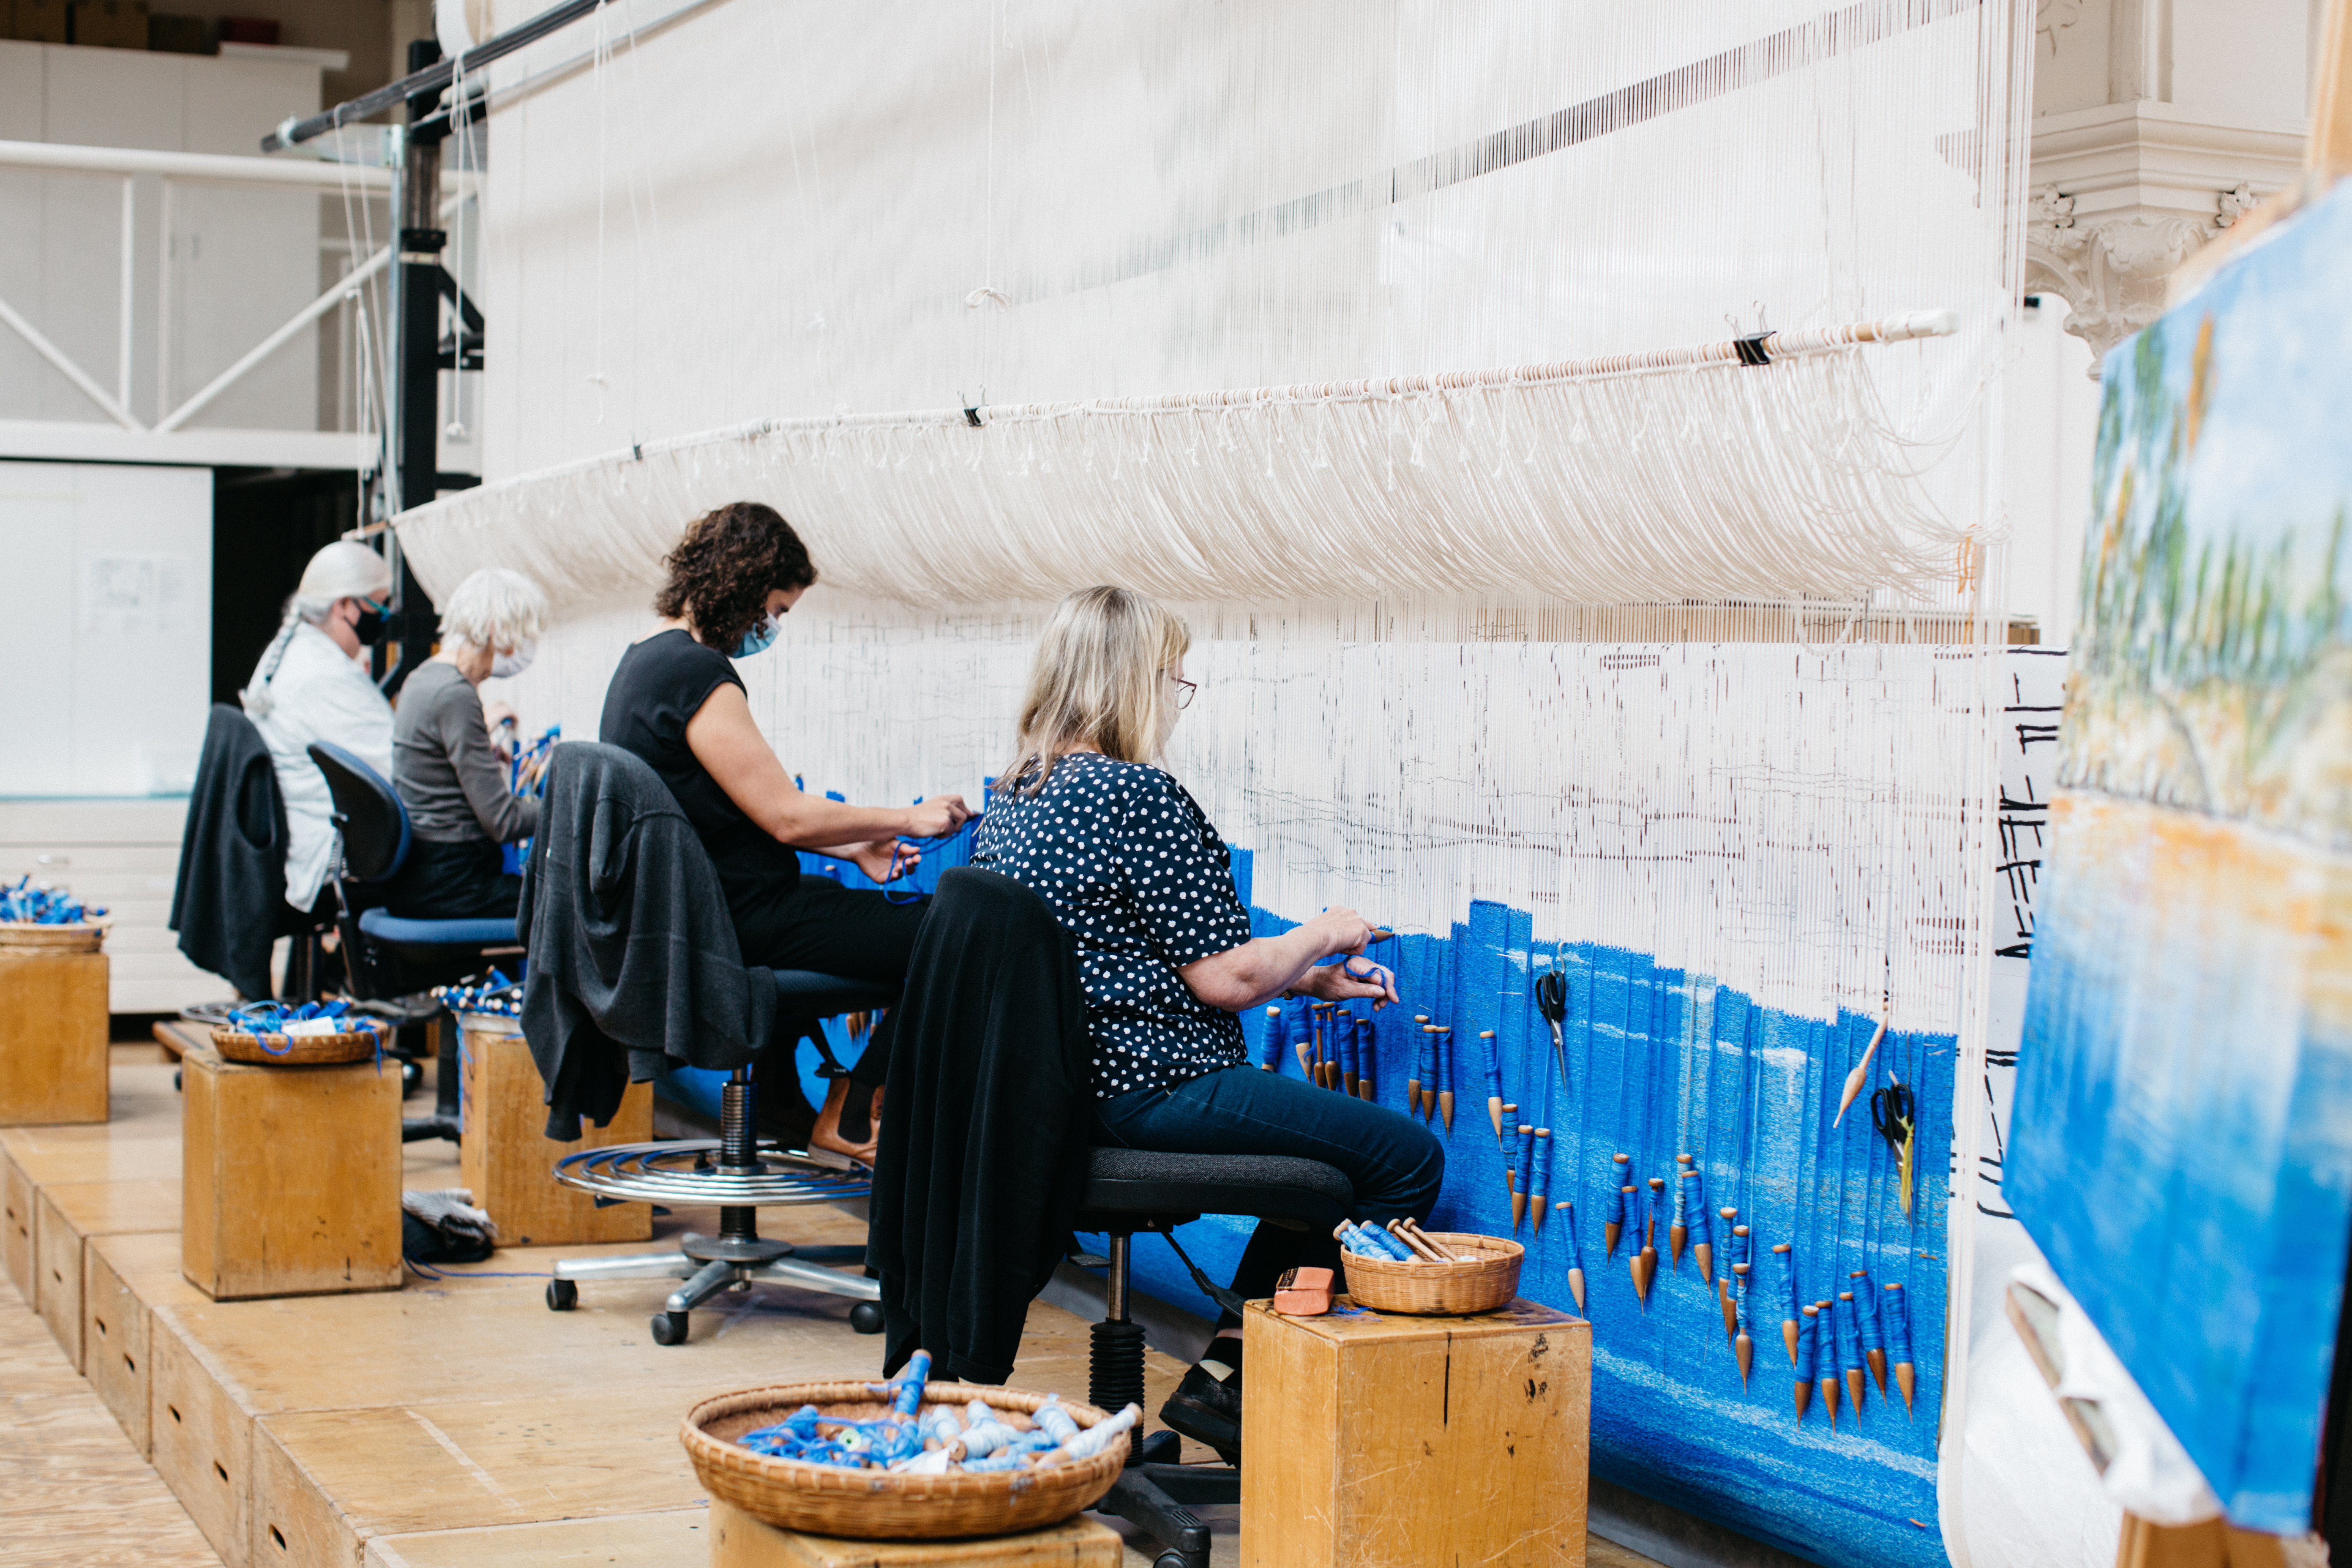 On the loom: 'Parramatta' tapestry. Photo: Marie-Luise Skibbe.